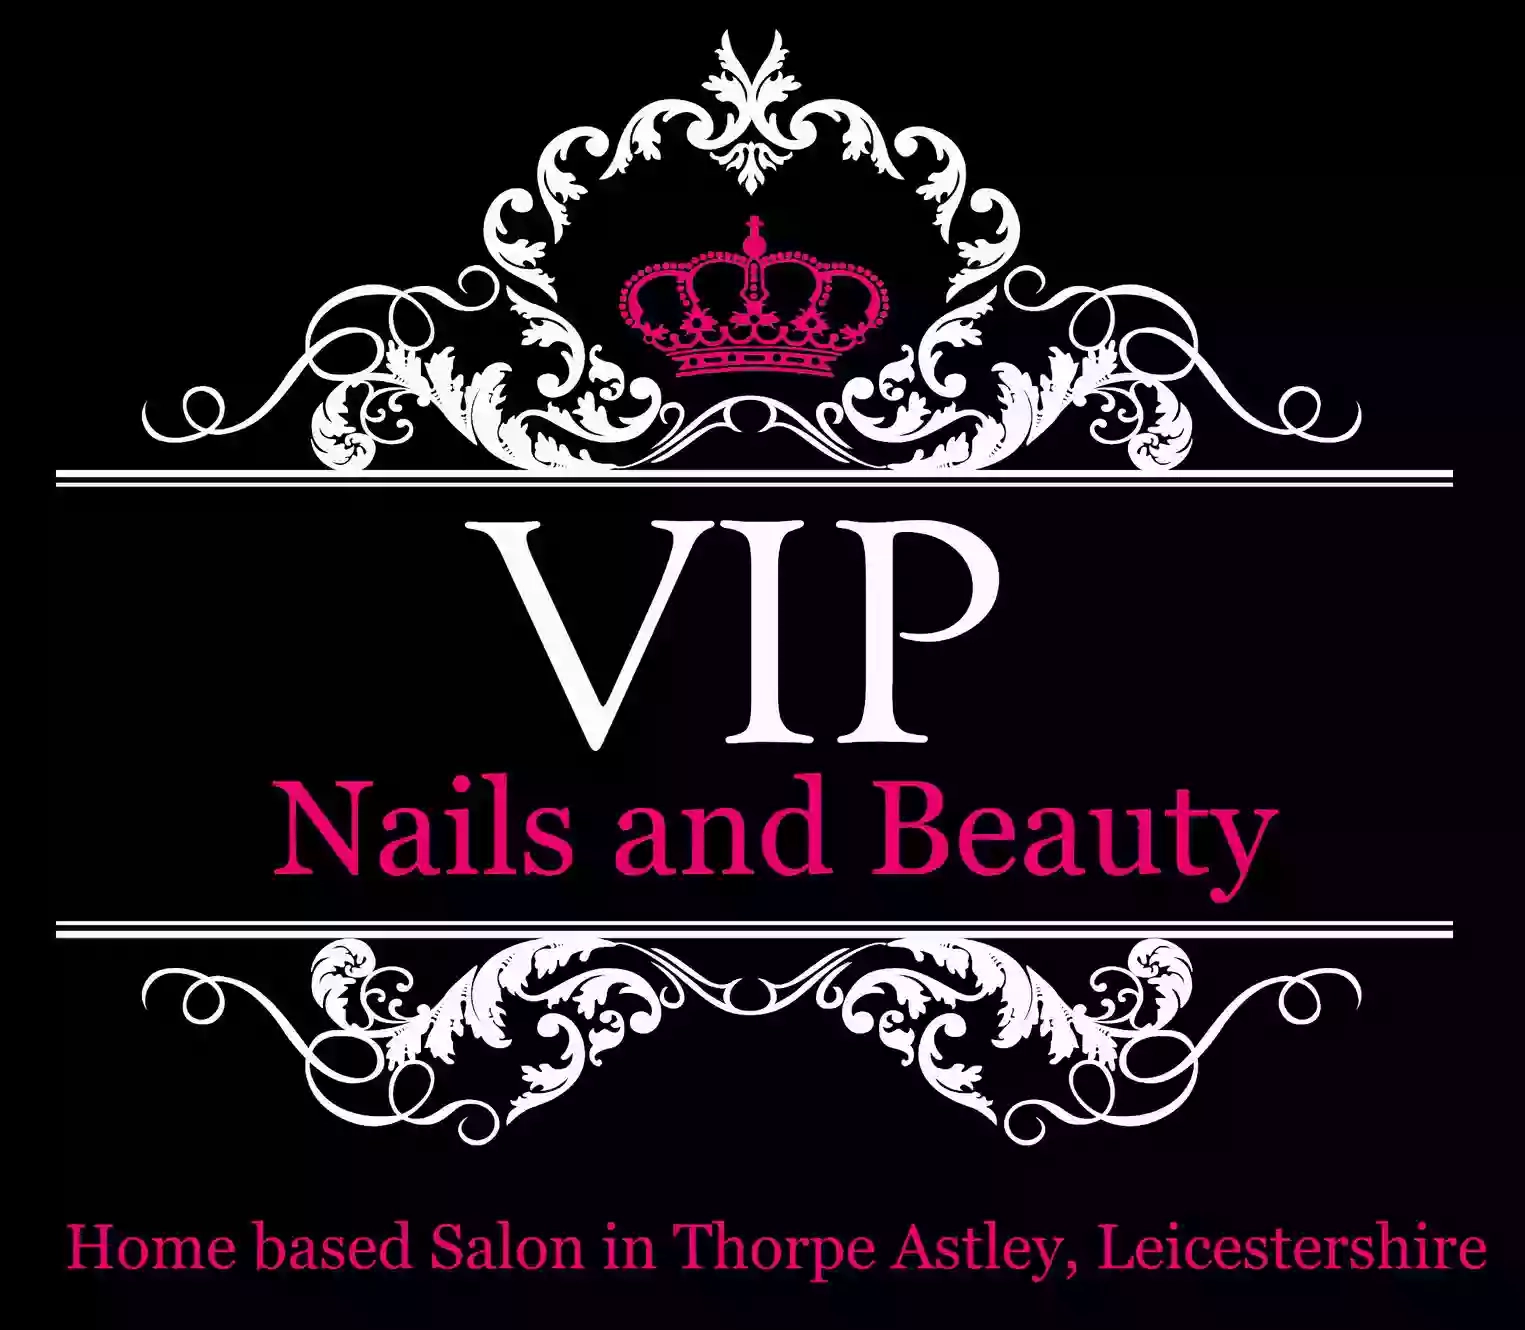 VIP Nails and Beauty, Thorpe Astley, Leicester